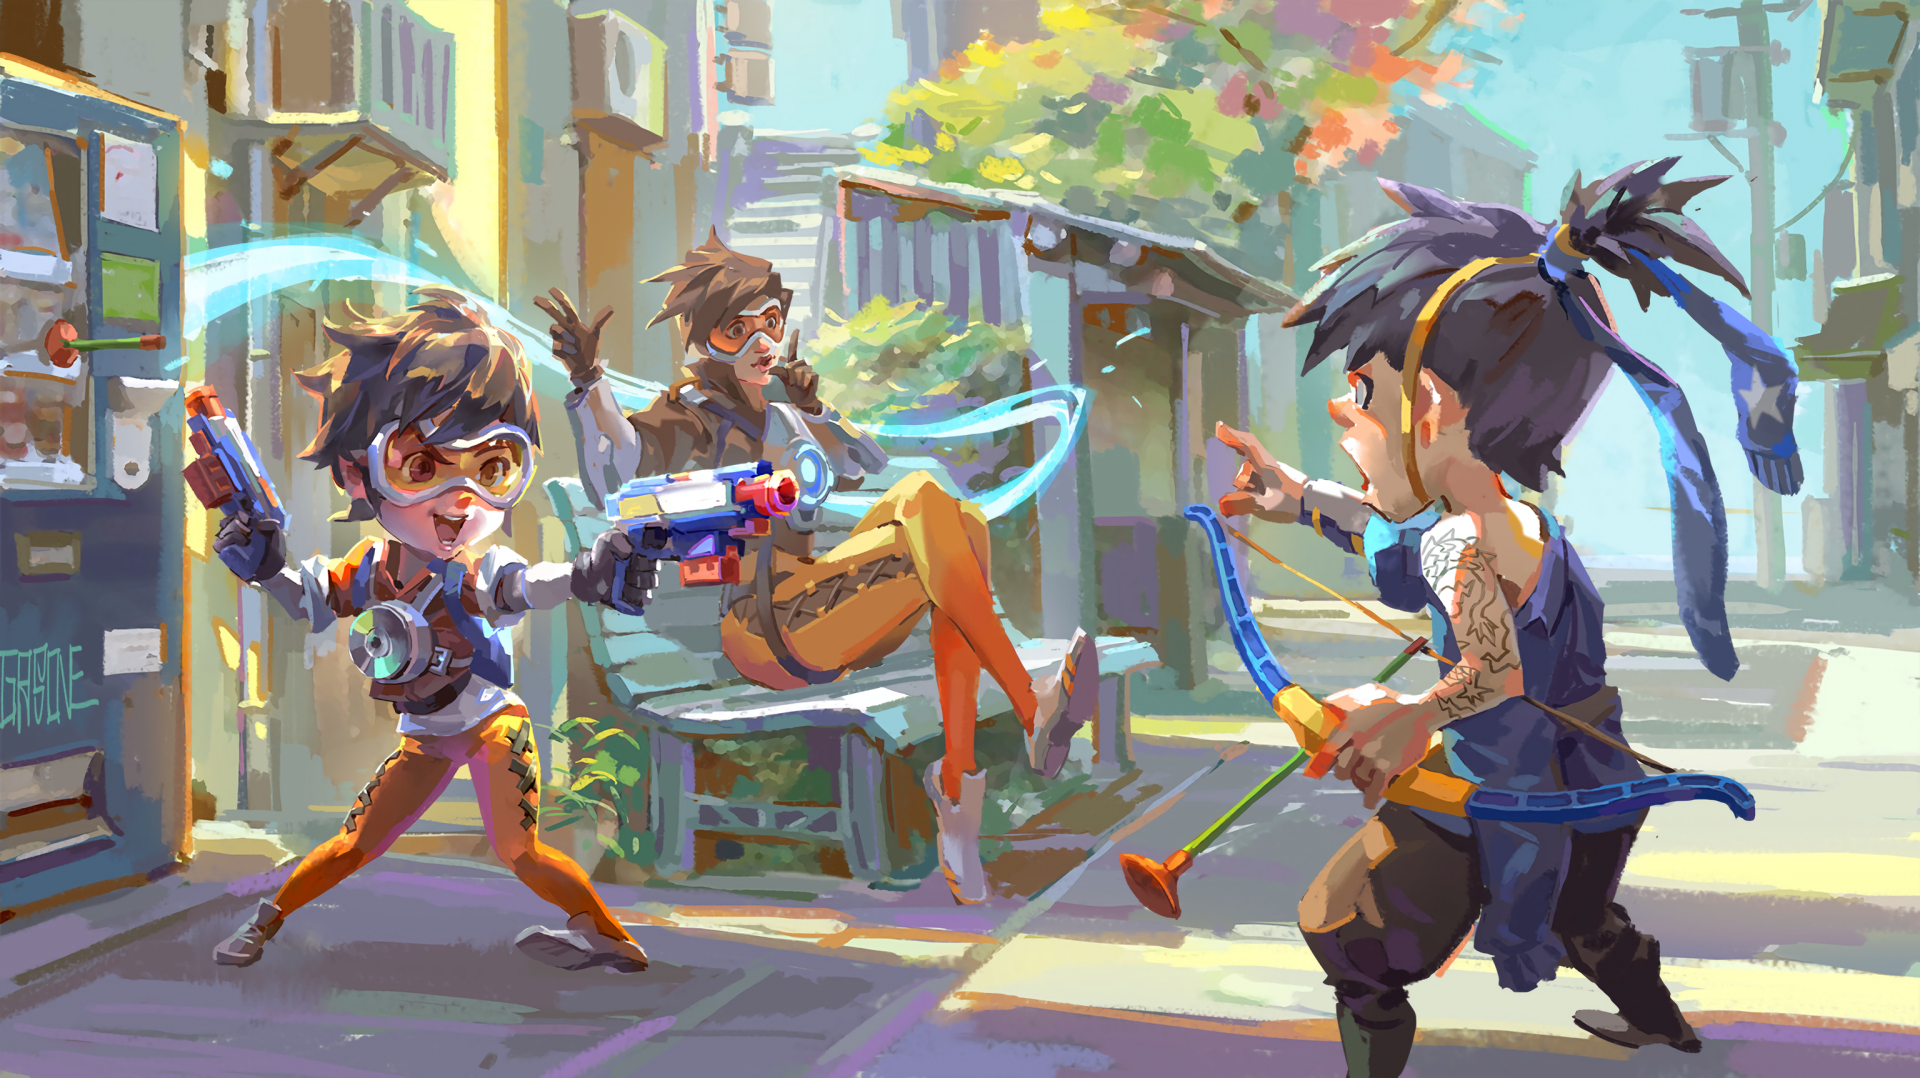 Download Tracer (Overwatch) Video Game Overwatch  HD Wallpaper by Shengyi Sun